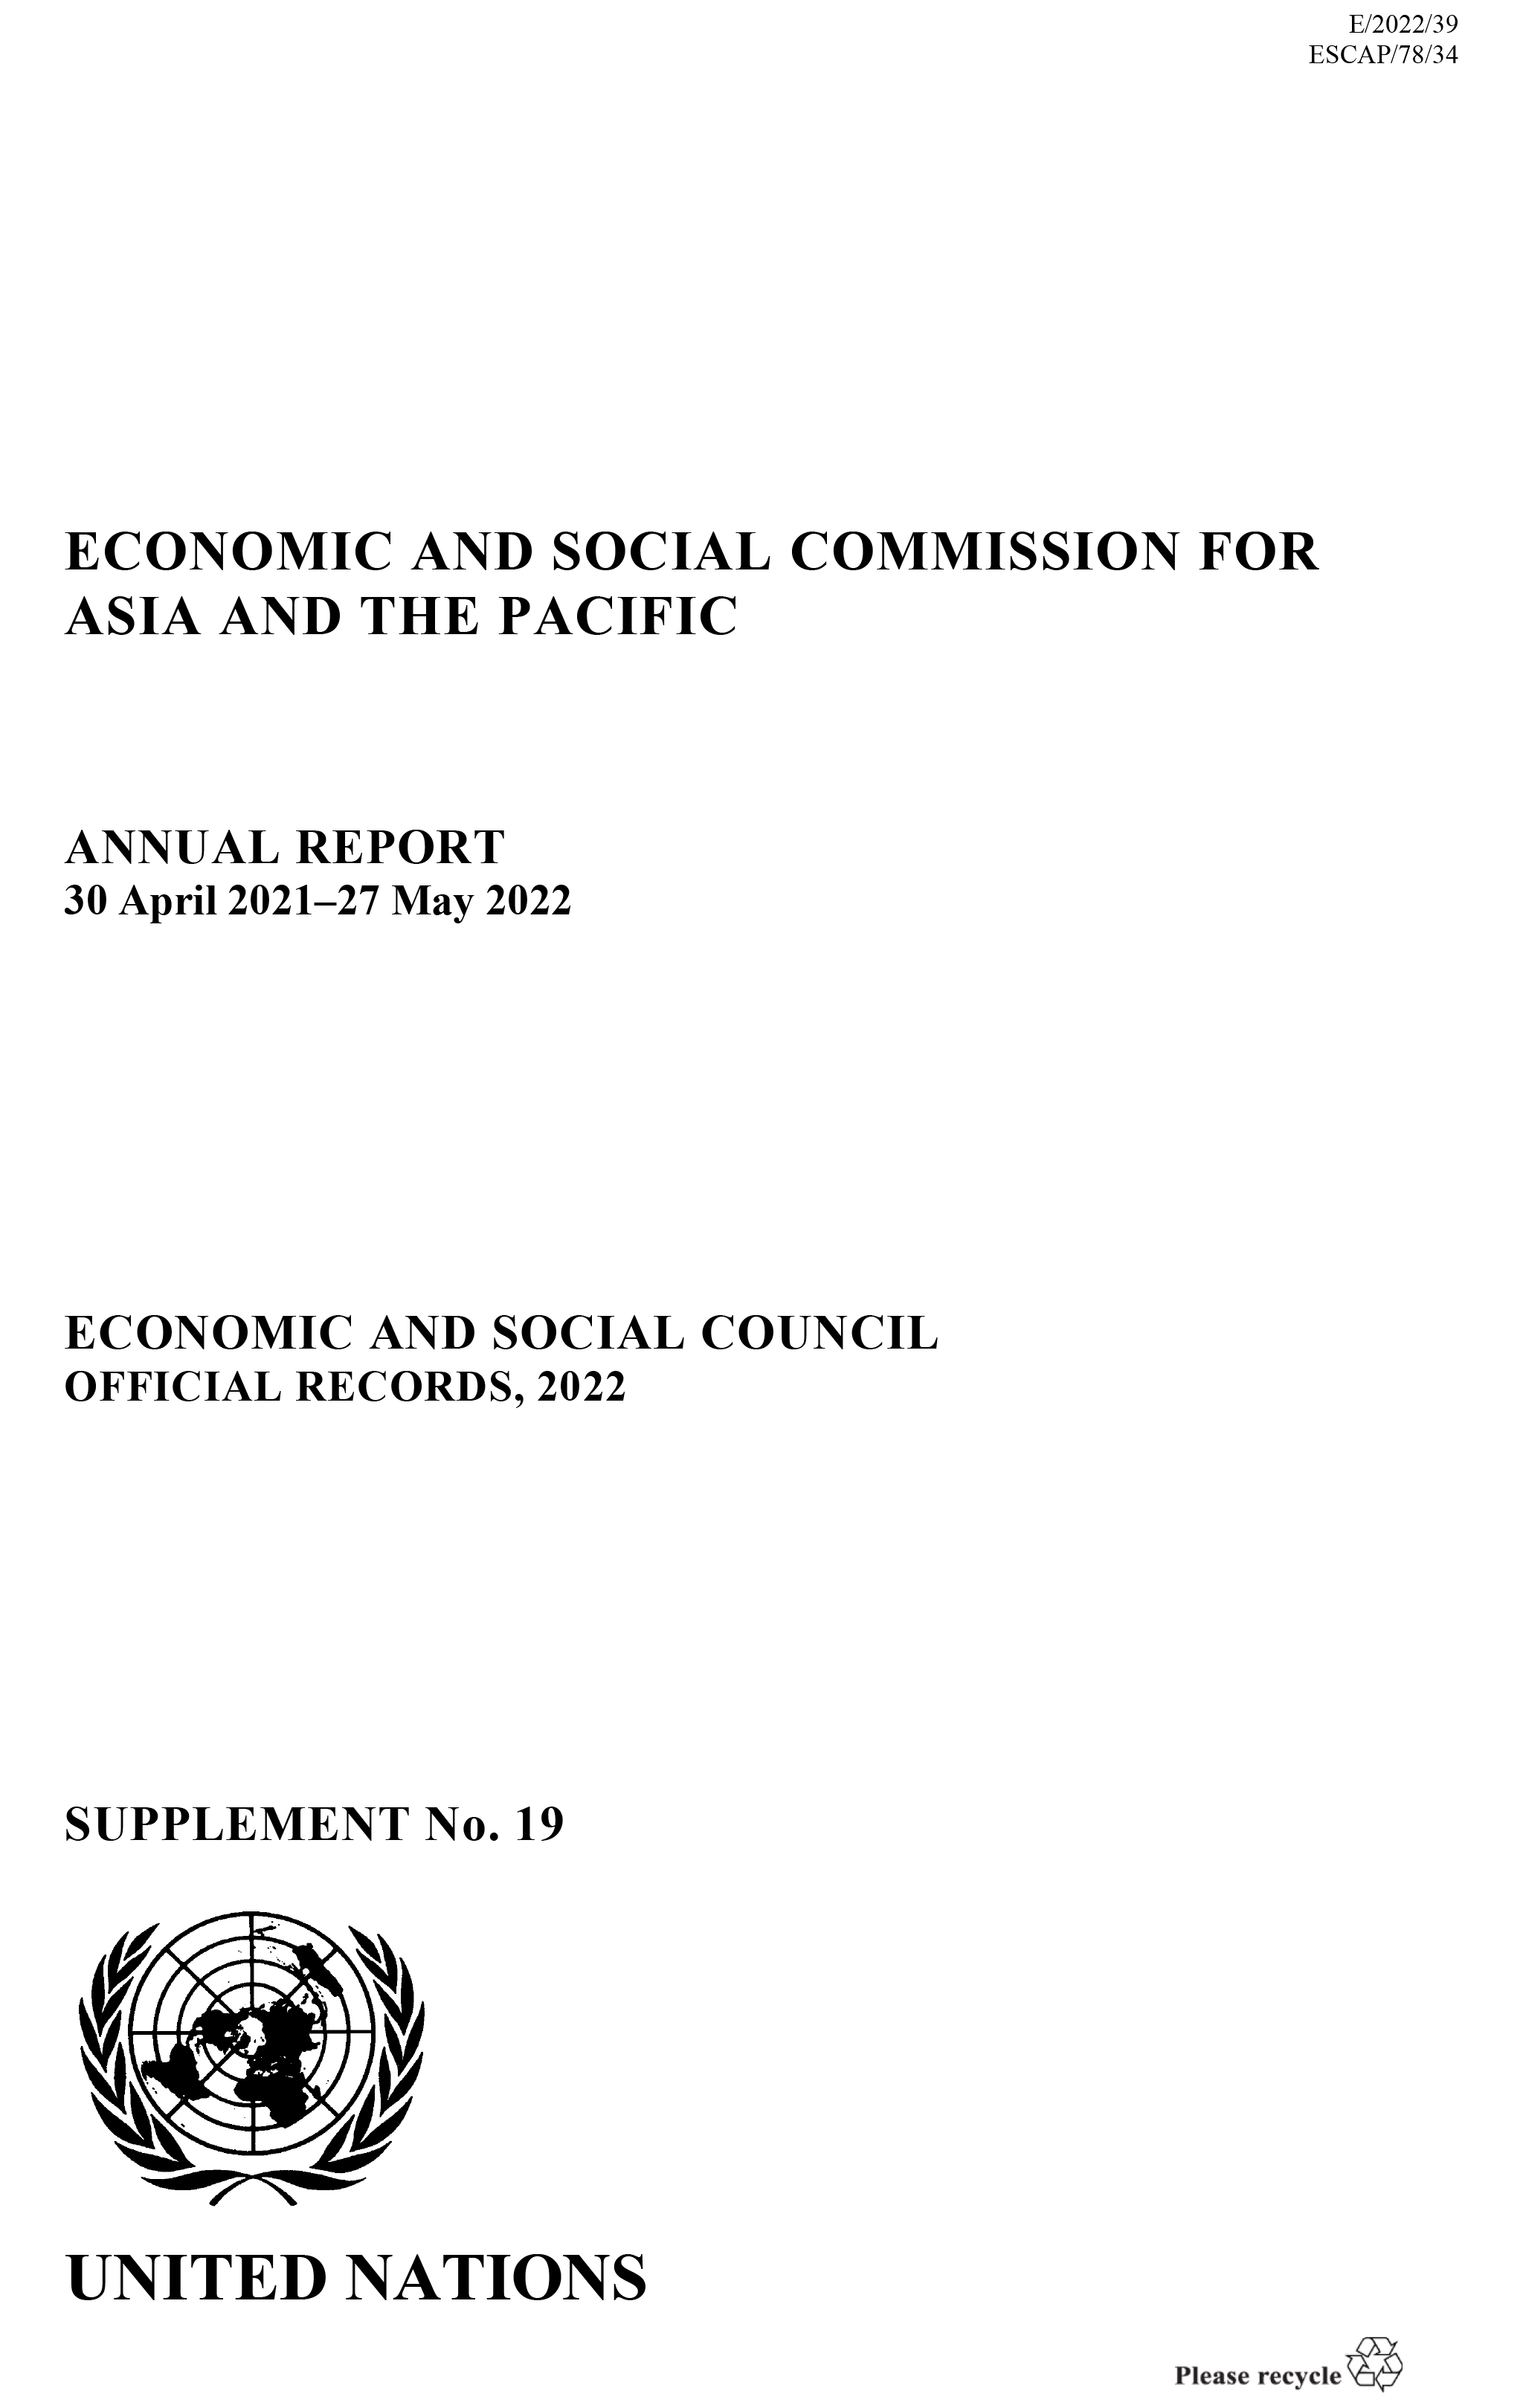 image of Annual Report of the Economic and Social Commission for Asia and the Pacific 2022